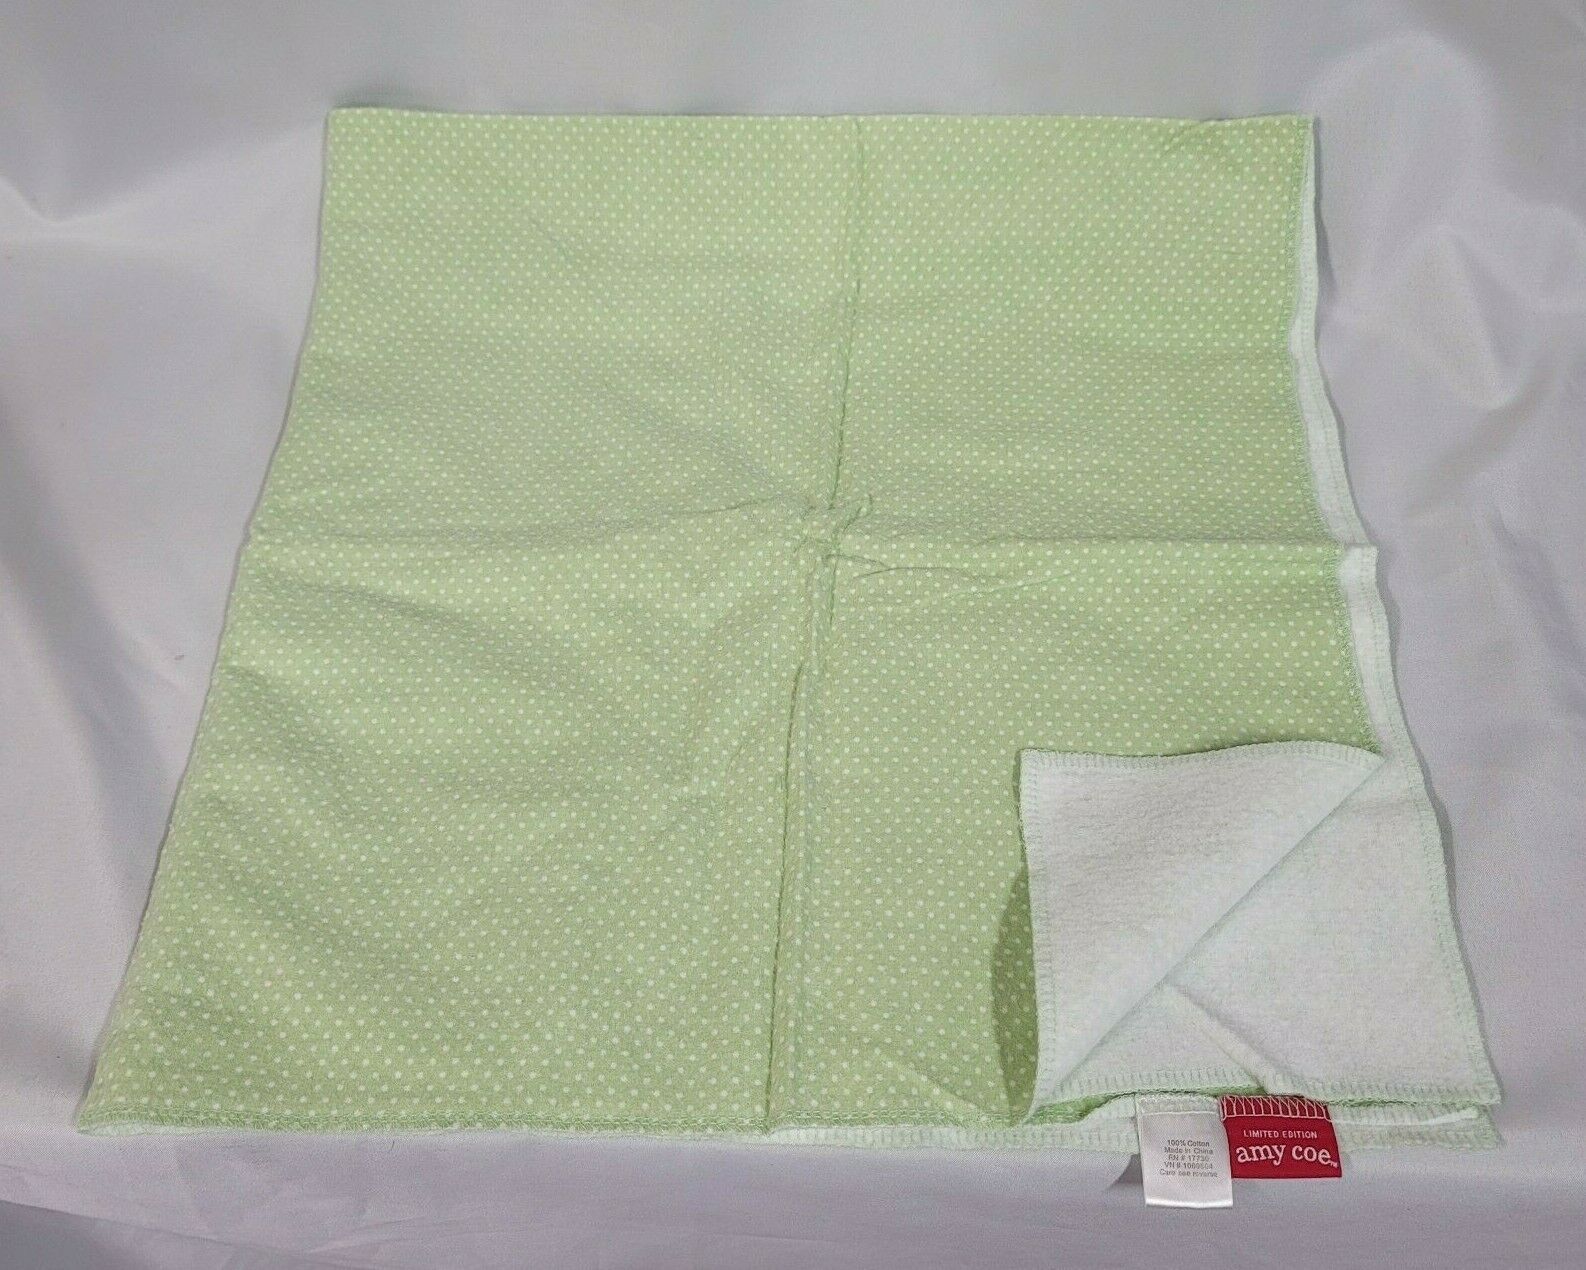 Amy Coe Limited Edition Polka Dot Baby Receiving Blanket Green White Flannel - $39.59